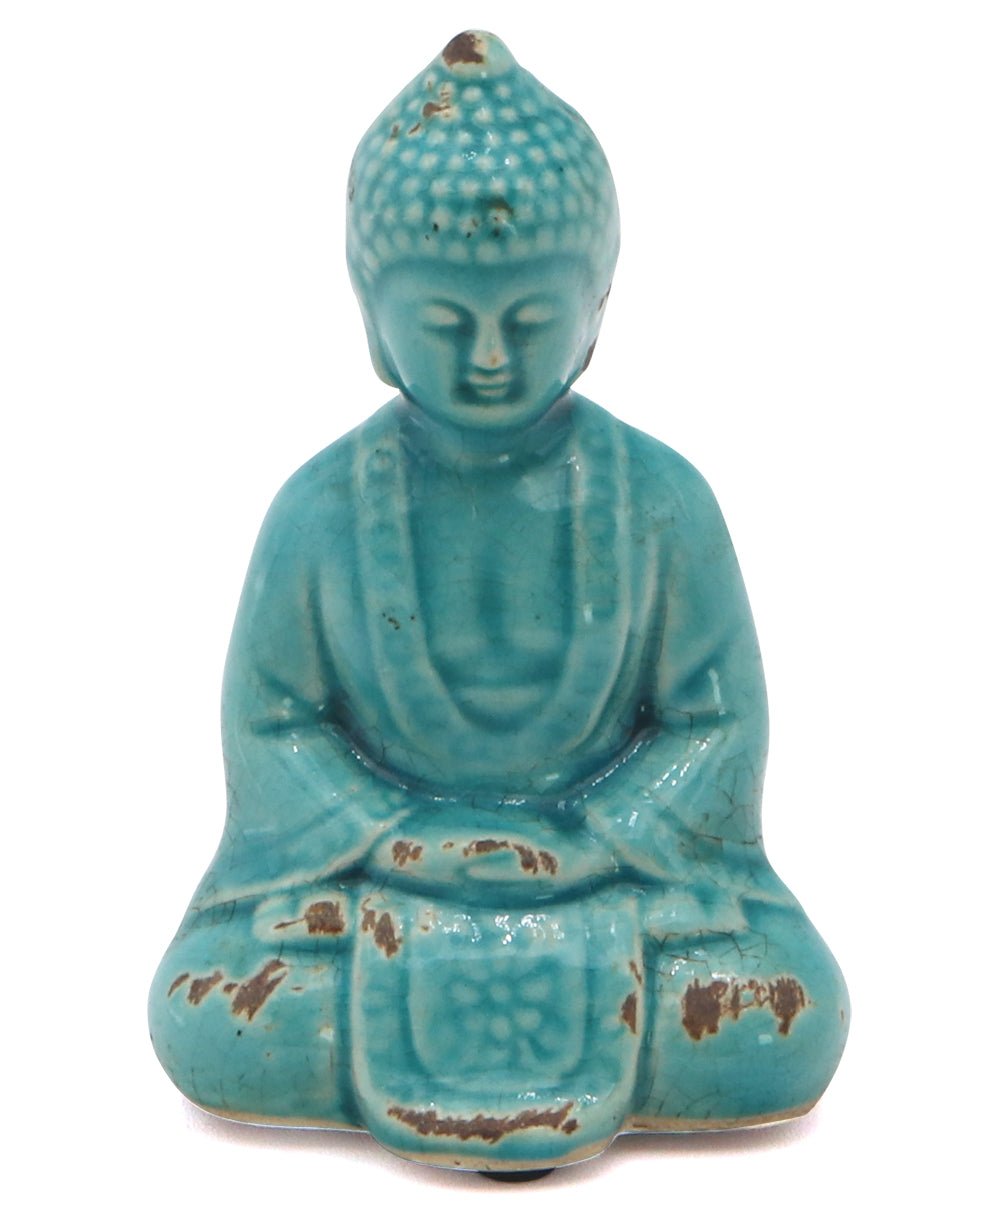 Turquoise Ceramic Buddha Statues, Set of 4 - Sculptures & Statues